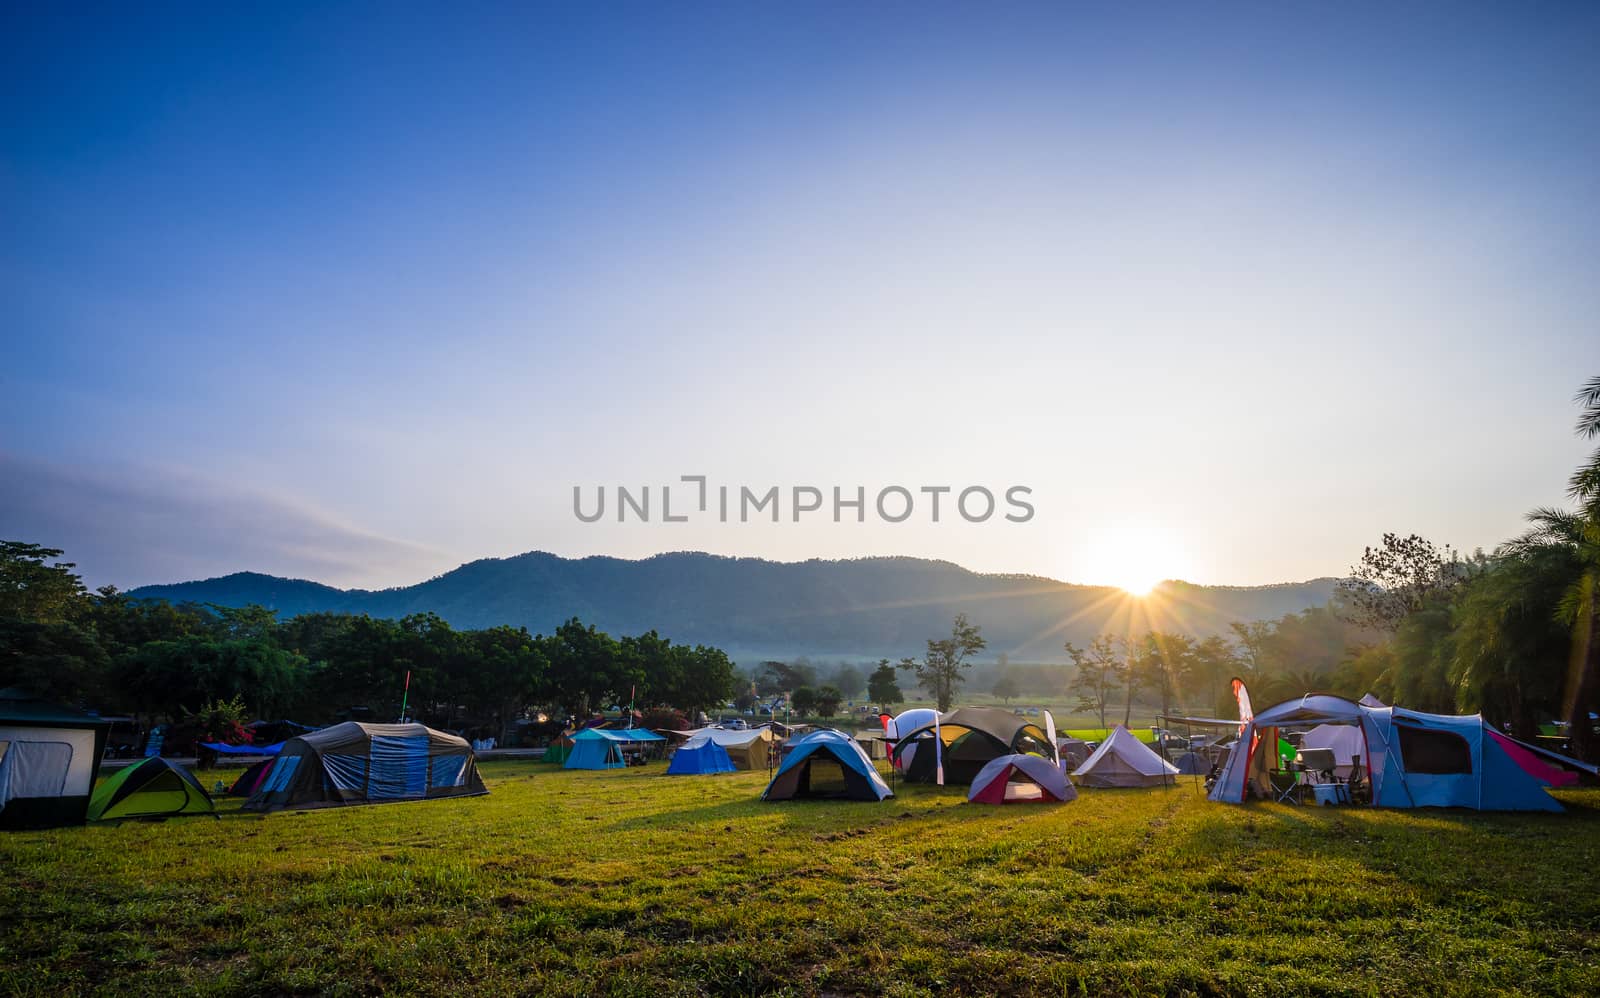 Camping and tent in nature park with sunrise behind the mountain